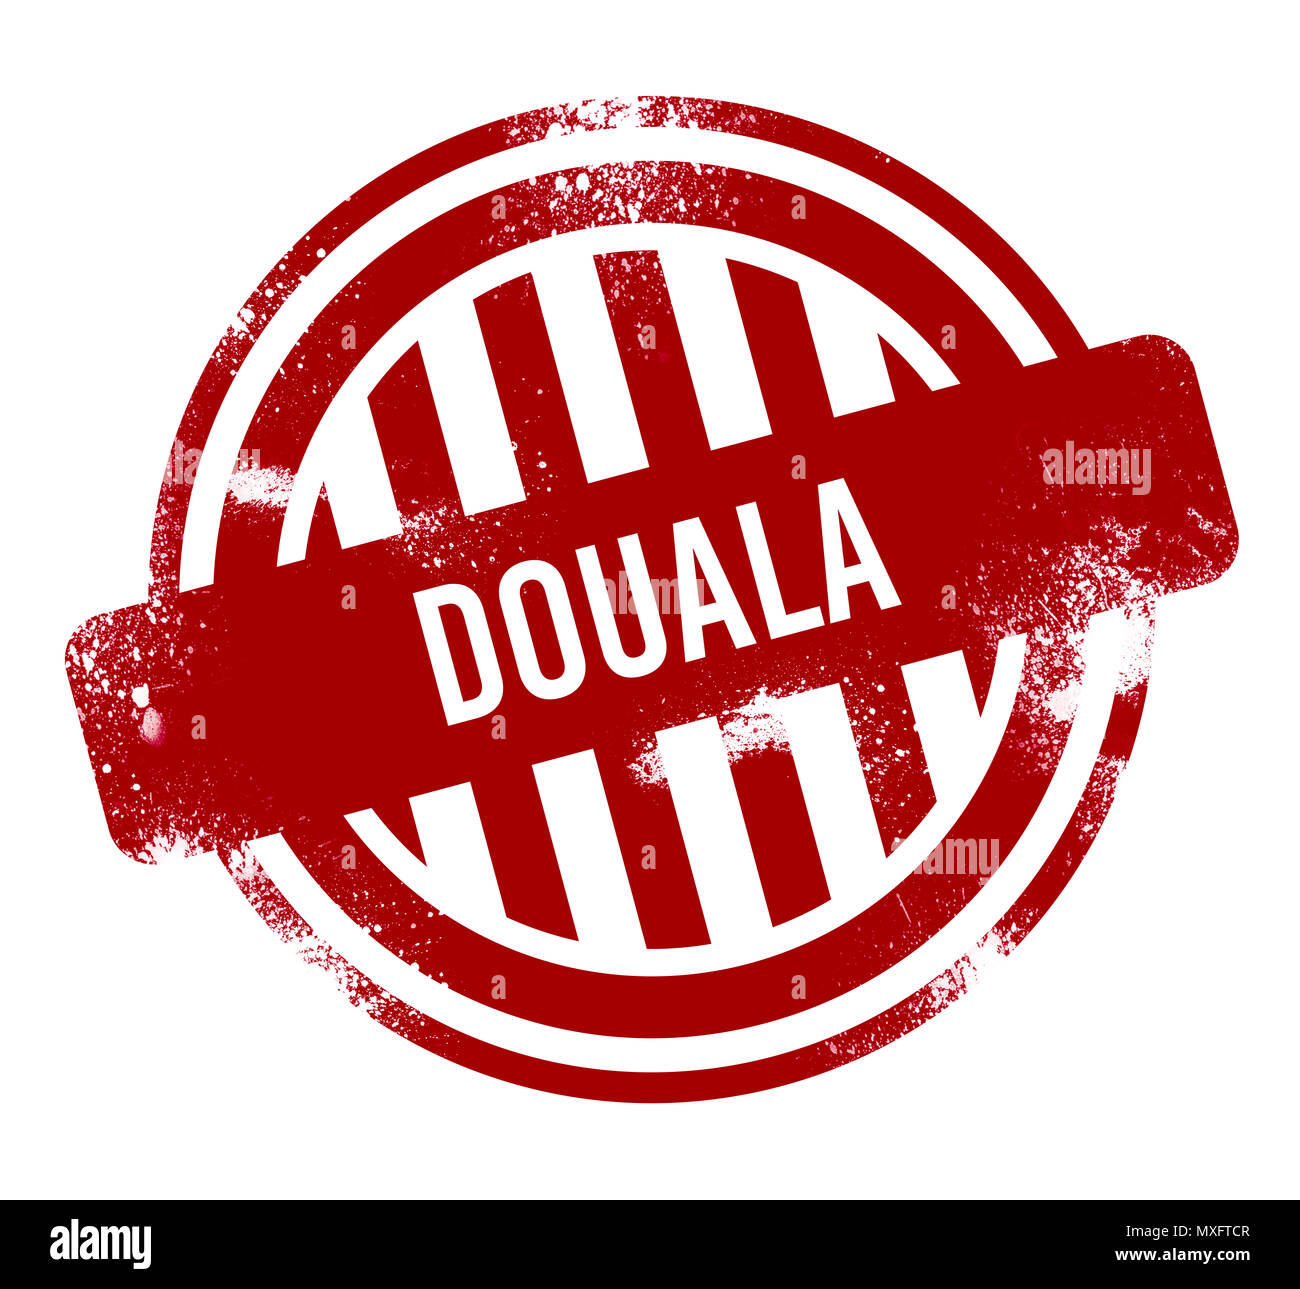 Douala - Red grunge button, stamp Stock Photo